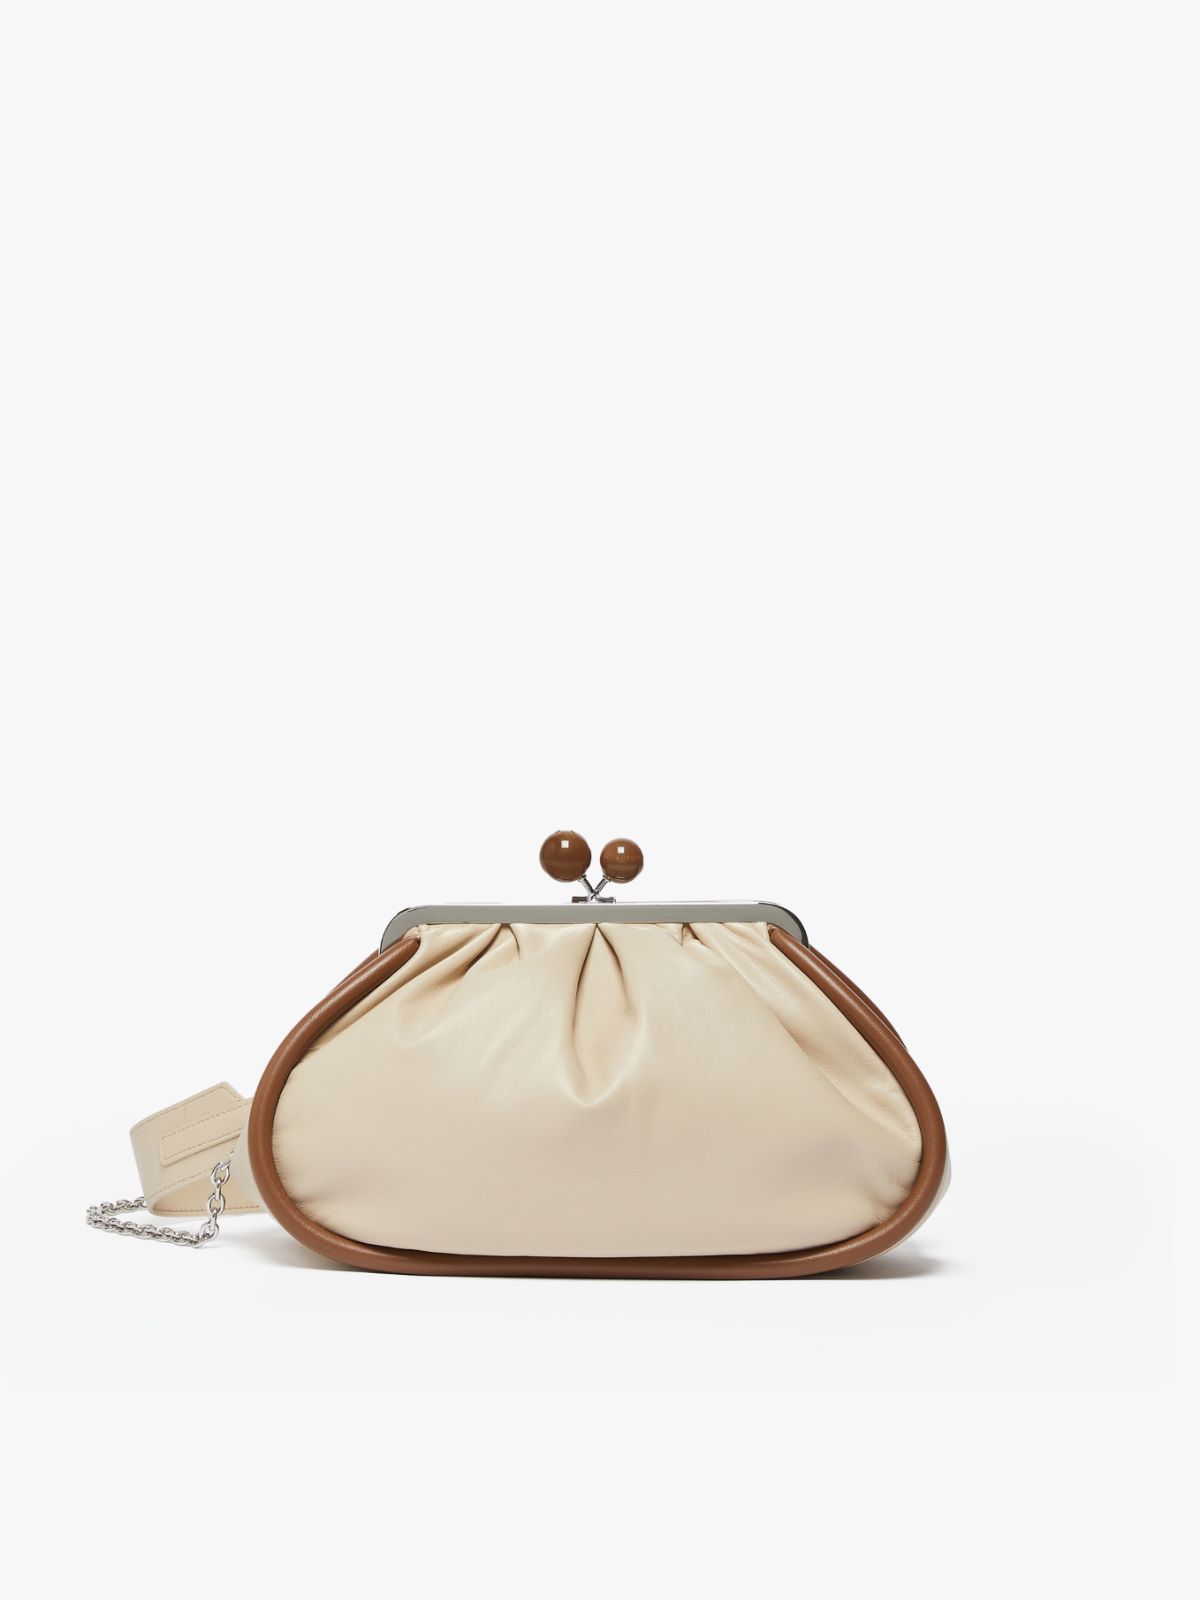 Small Pasticcino Bag in nappa leather, brown | 